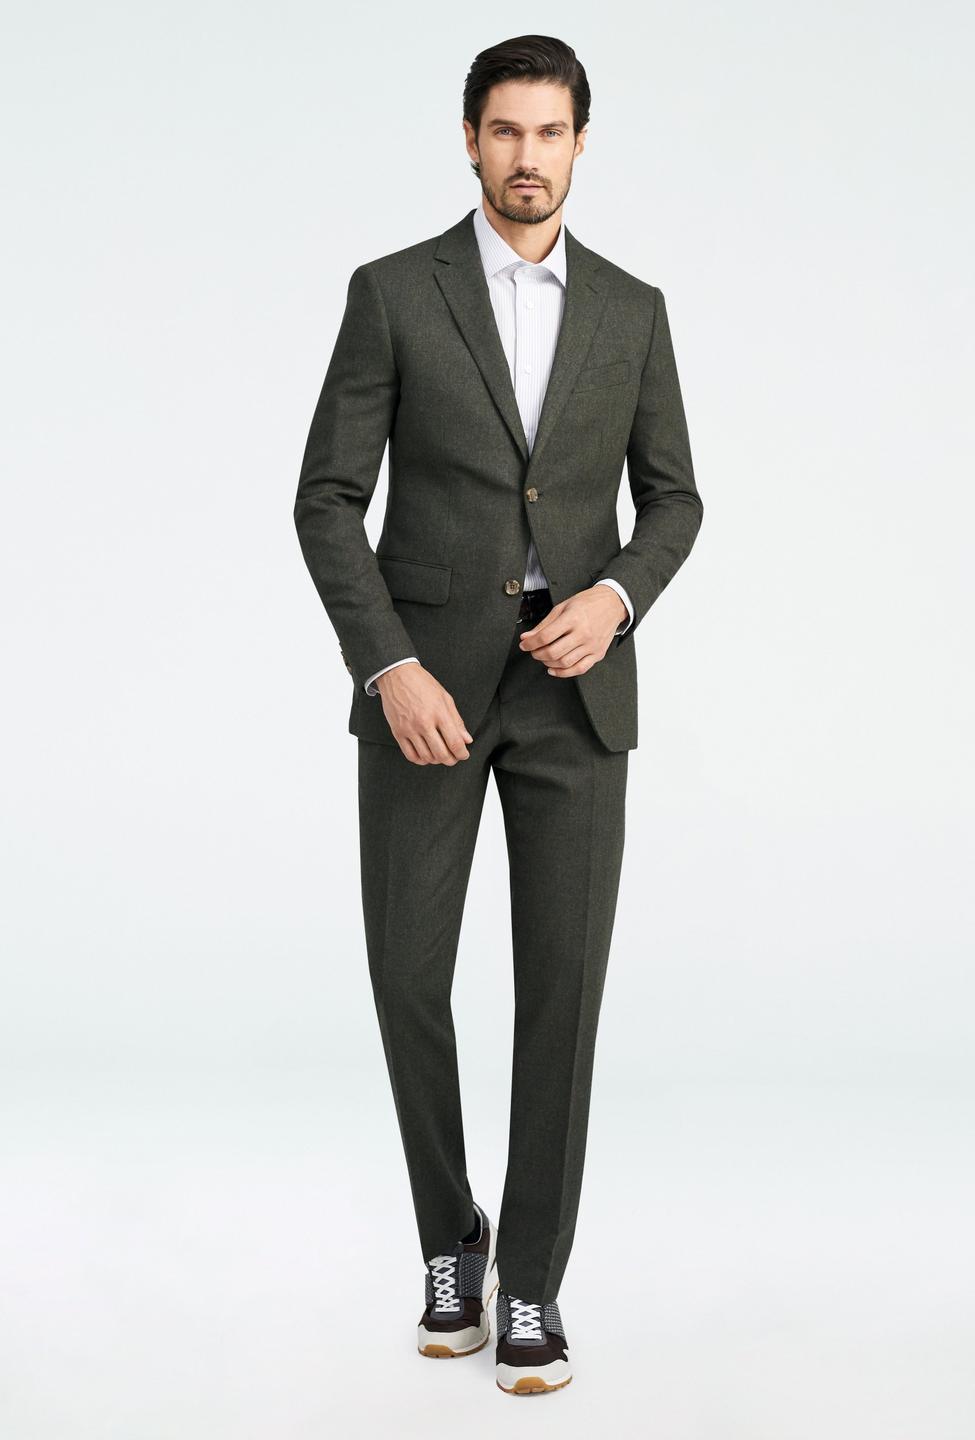 Olive suit - Hayward Solid Design from Luxury Indochino Collection